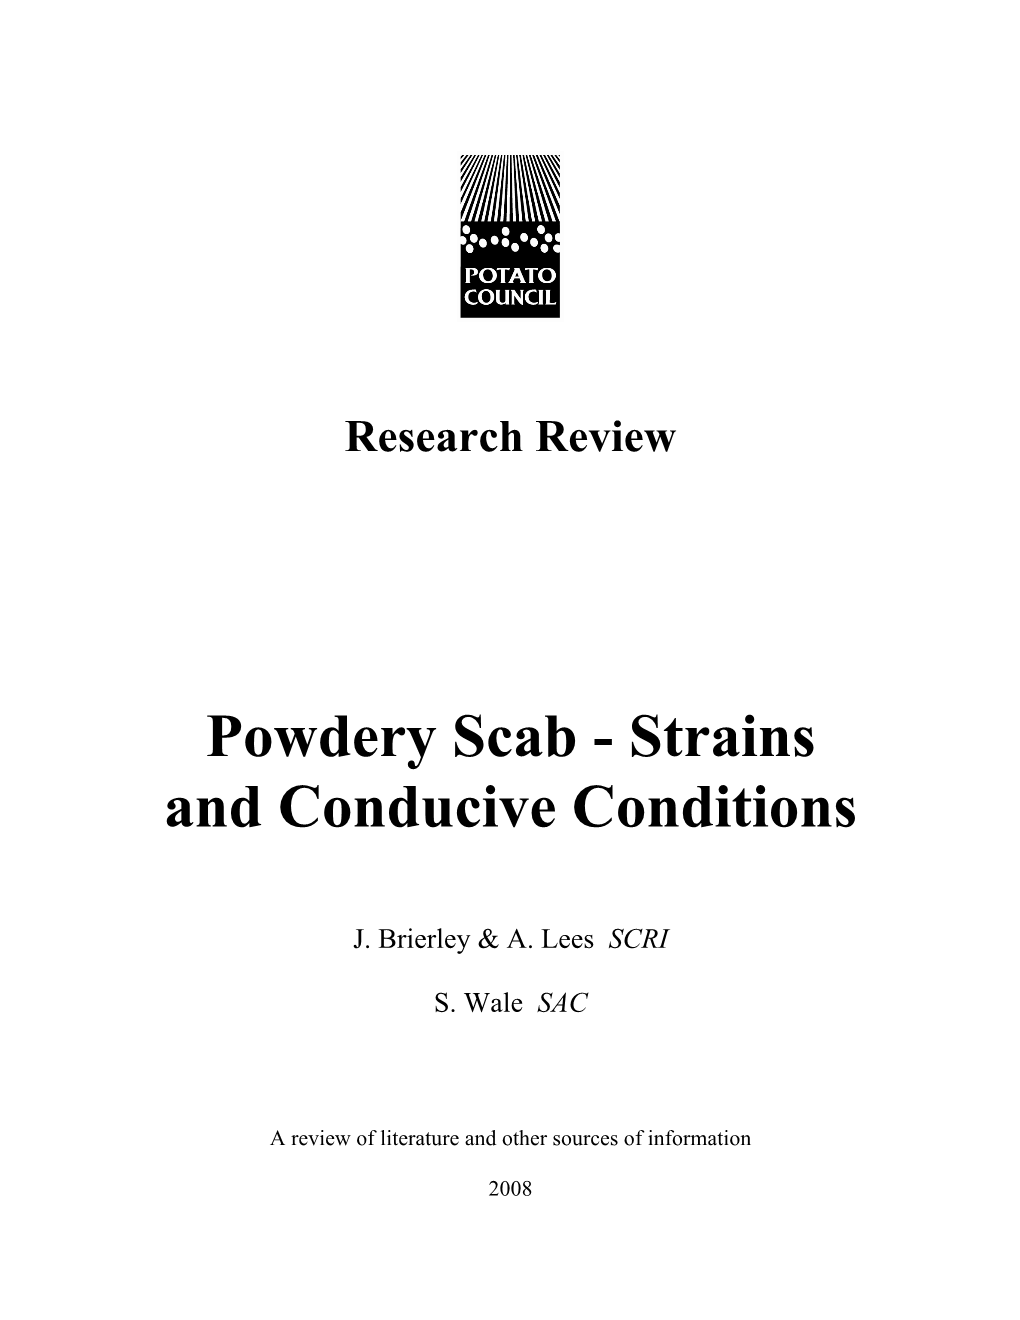 Powdery Scab - Strains and Conducive Conditions